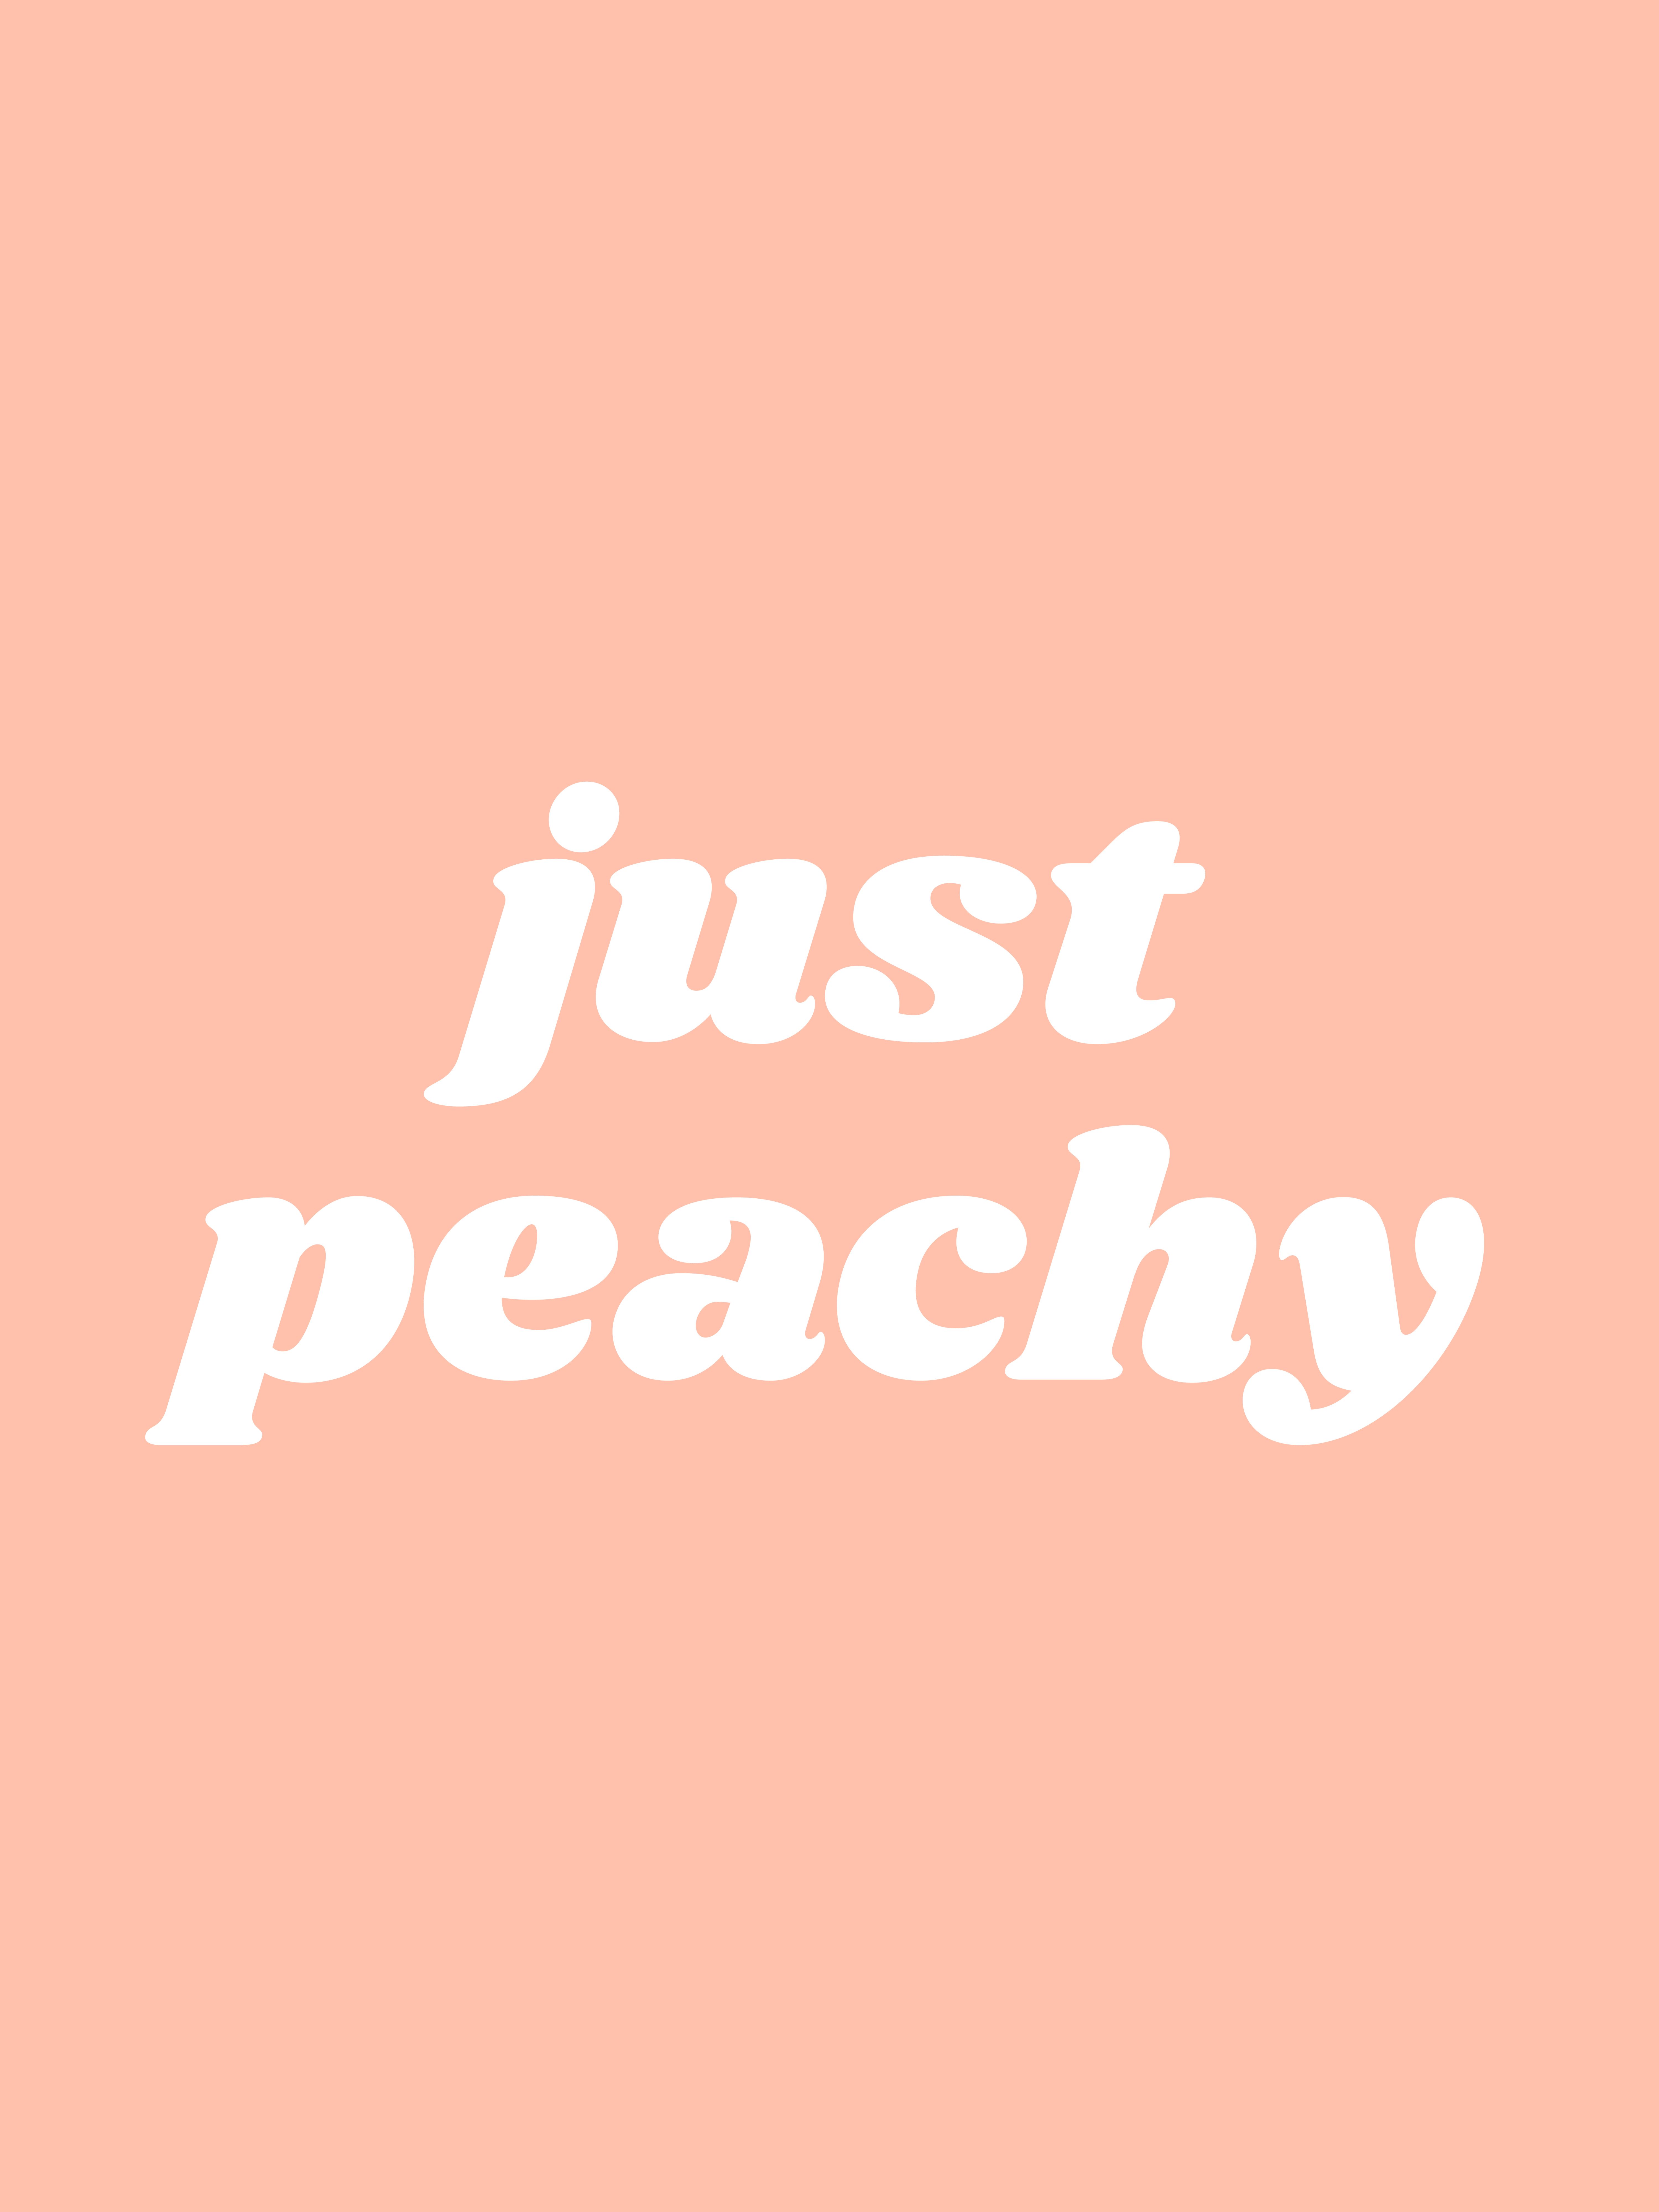 just peachy. Picture collage wall, Photo wall collage, Picture collage